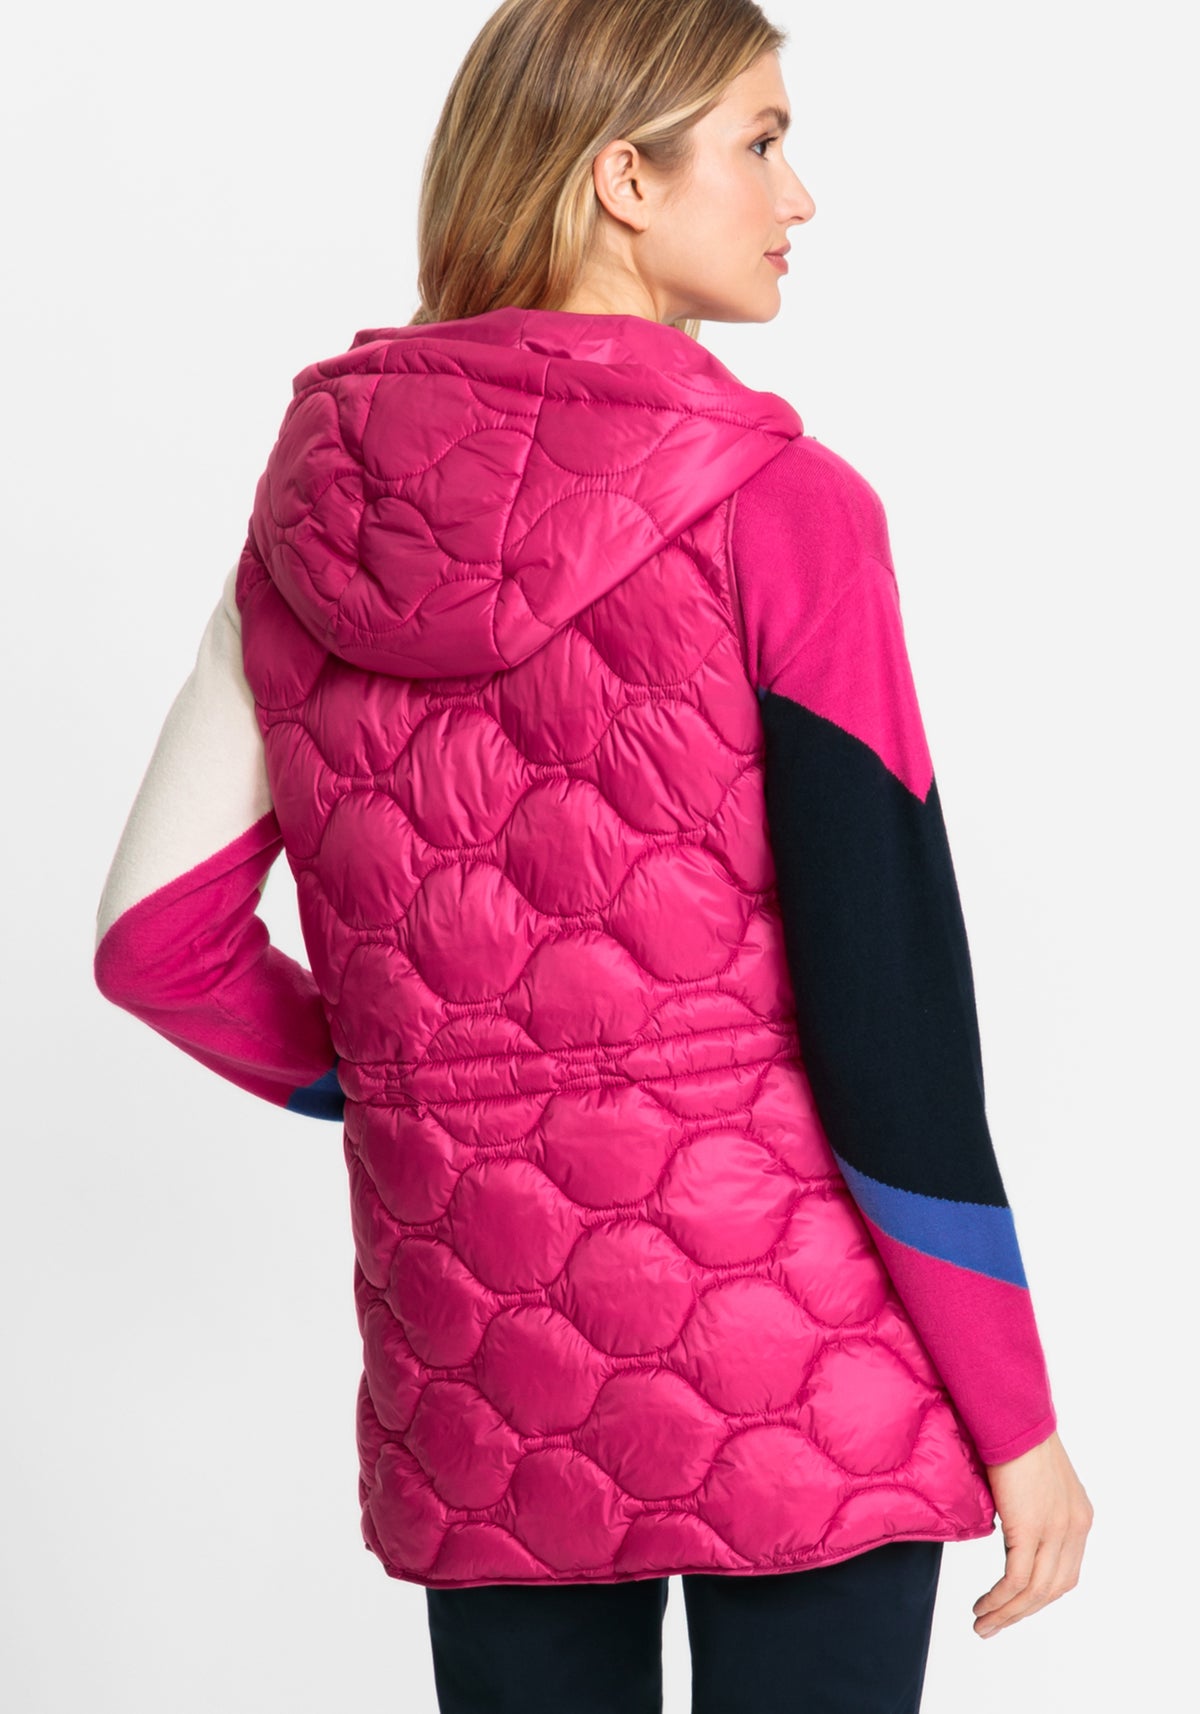 Long Line Quilted Vest containing 3M Thinsulate™